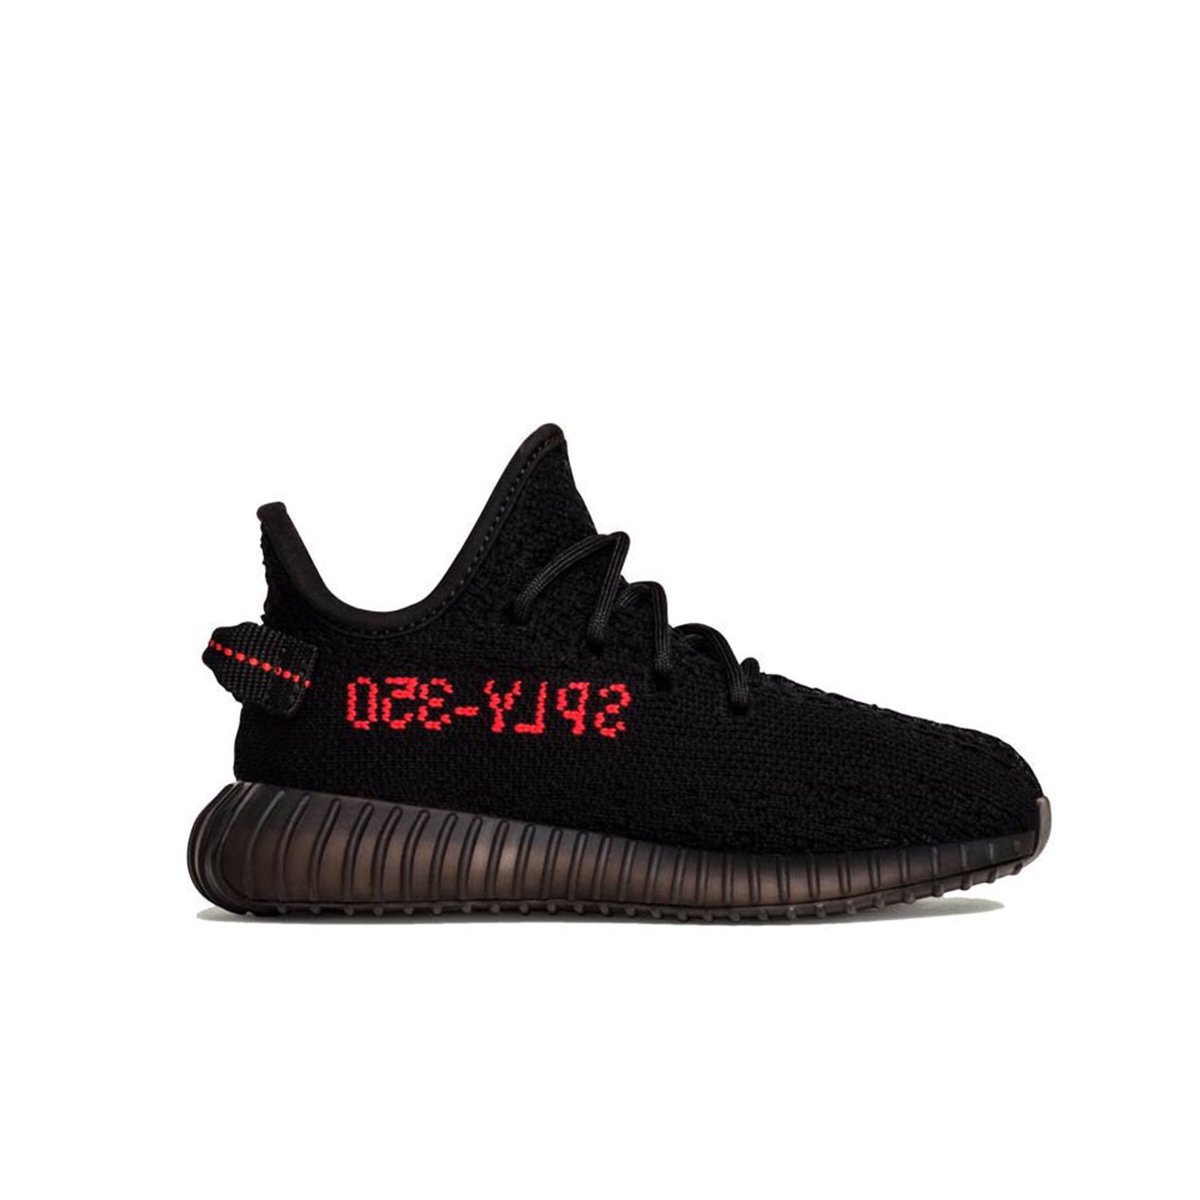 Black Yeezy 350's sizes toddler 5-10 available on https://t.co/BlGB6KQnnV dropping next week https://t.co/vcDm8PzWEh